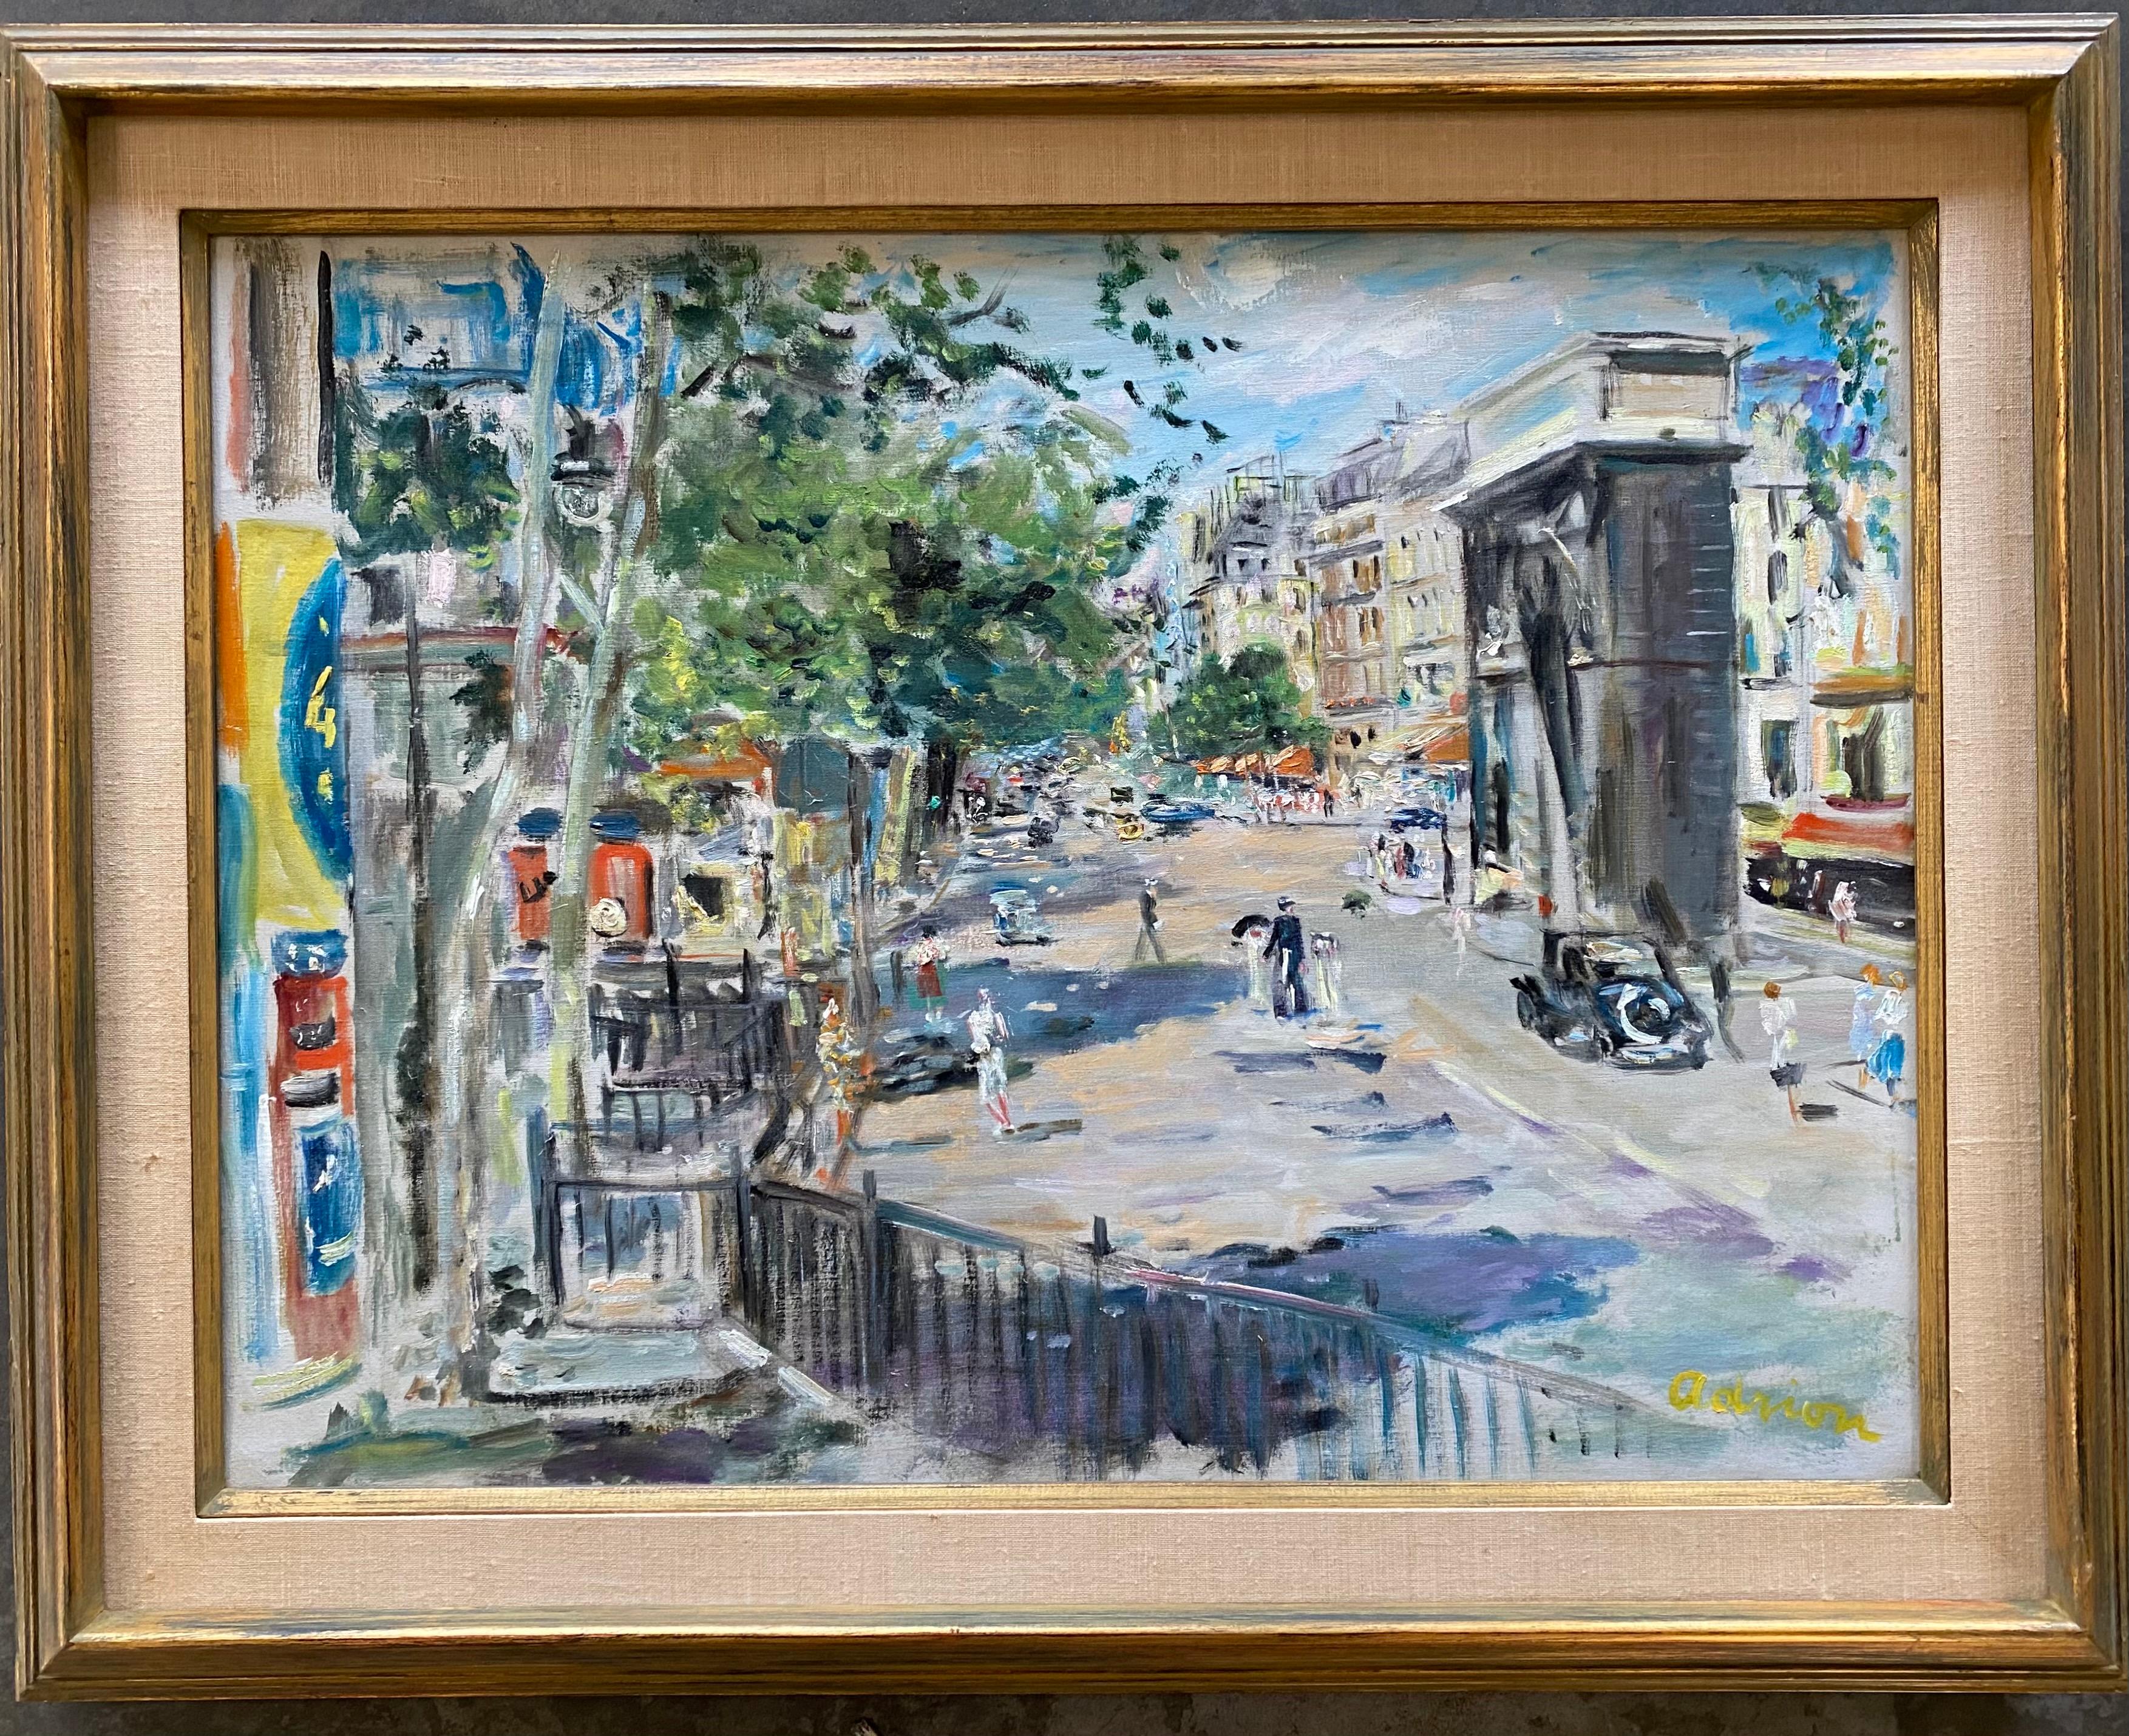 Porte St. Martin - Painting by Lucien Adrion